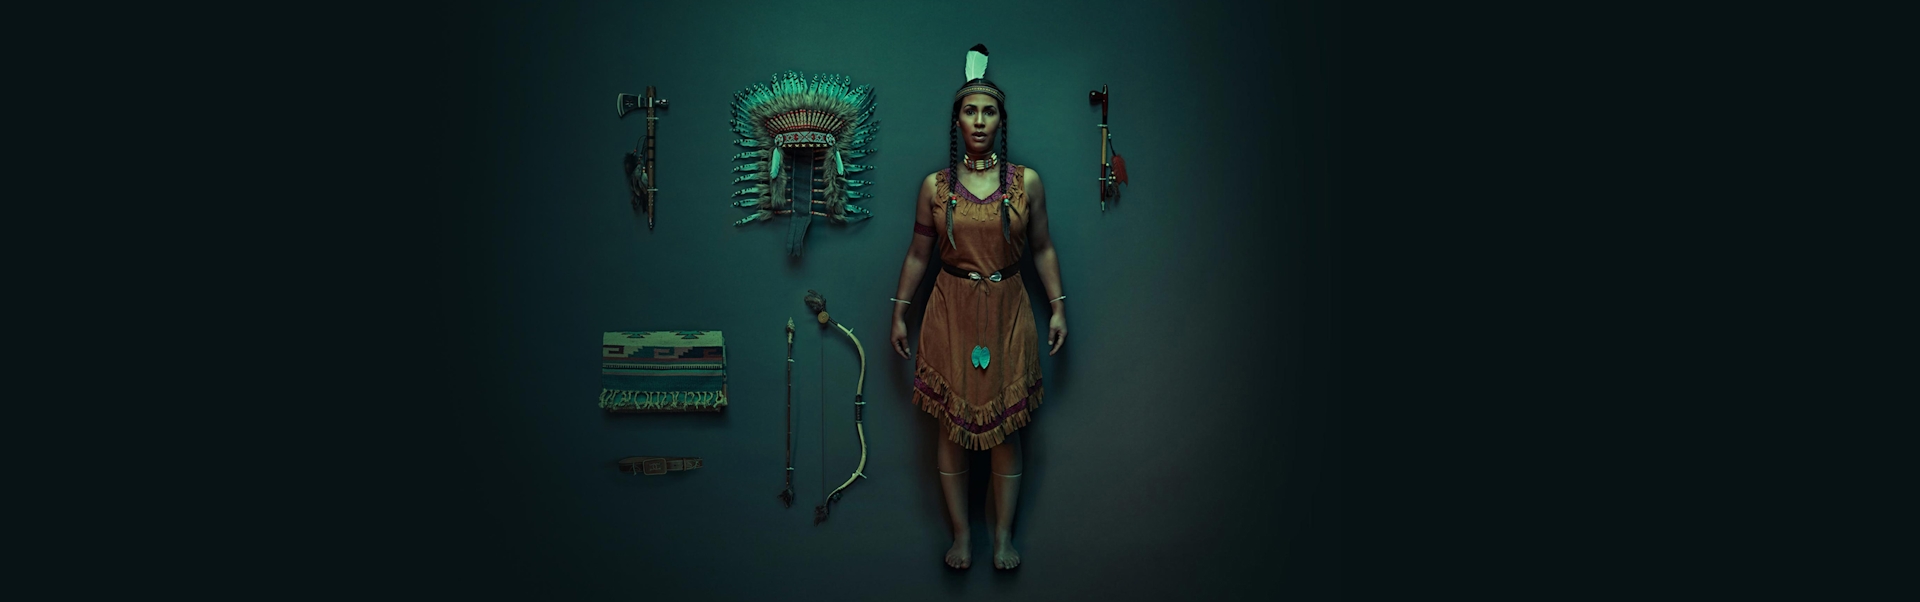 An American Indian woman dressed in traditional clothing standing in a dark room with American Indian accessories on display